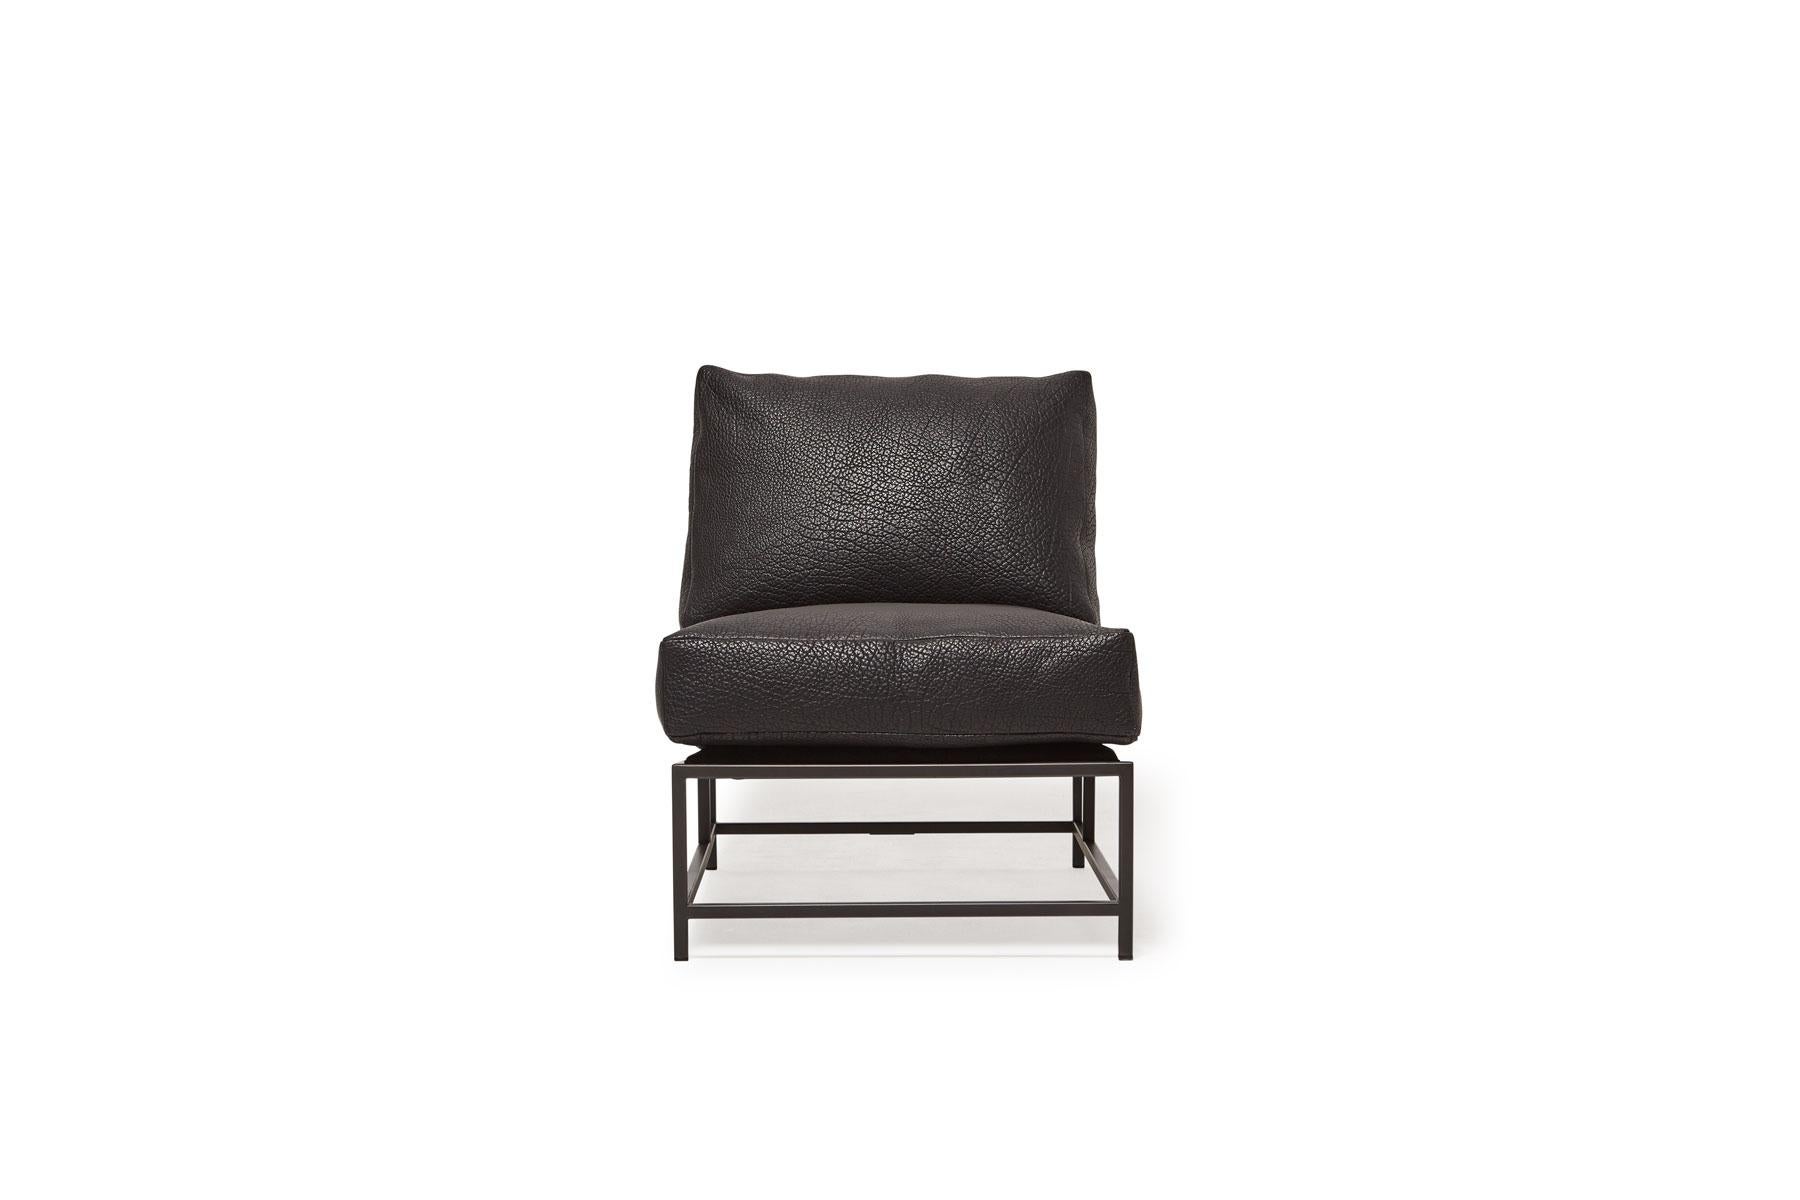 Sleek and refined, the Inheritance Collection chair by Stephen Kenn is a great addition to nearly any space. 

This chair is upholstered in a beautifully textured pebbled black bison leather. The foam seat cushion has been wrapped in down,